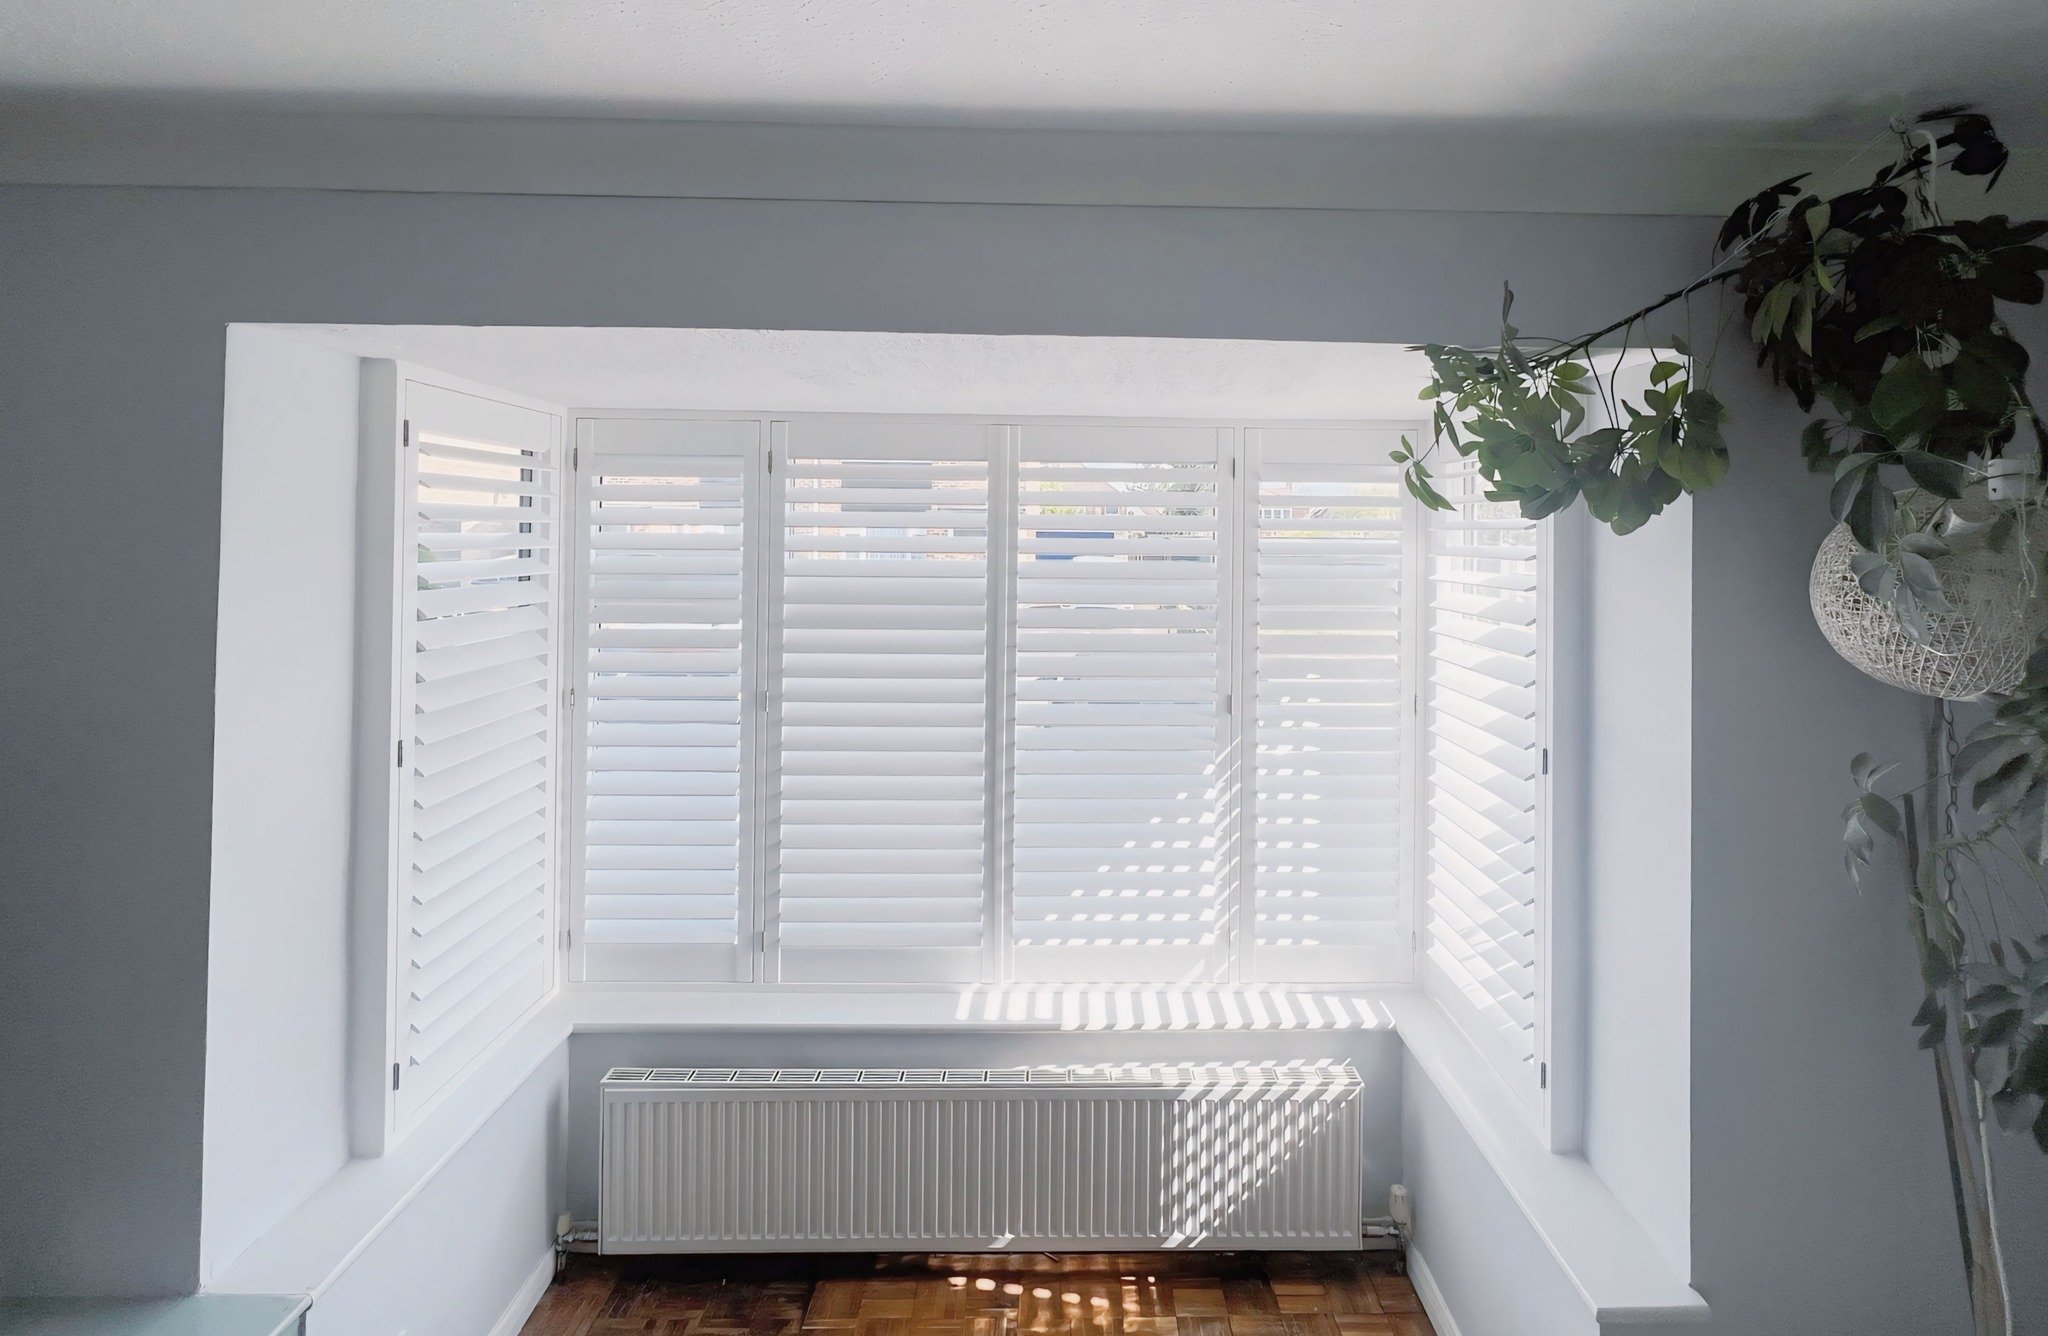 Transforming Bay Windows, One Shutter At a Time! 

Check out Our Latest Bay Window Installation, Bringing Elegance and Functionality to This Beautiful Bay Window. From Stunning Aesthetics to Enhanced Privacy, Our Shutters Do It All. 

Get in Touch to